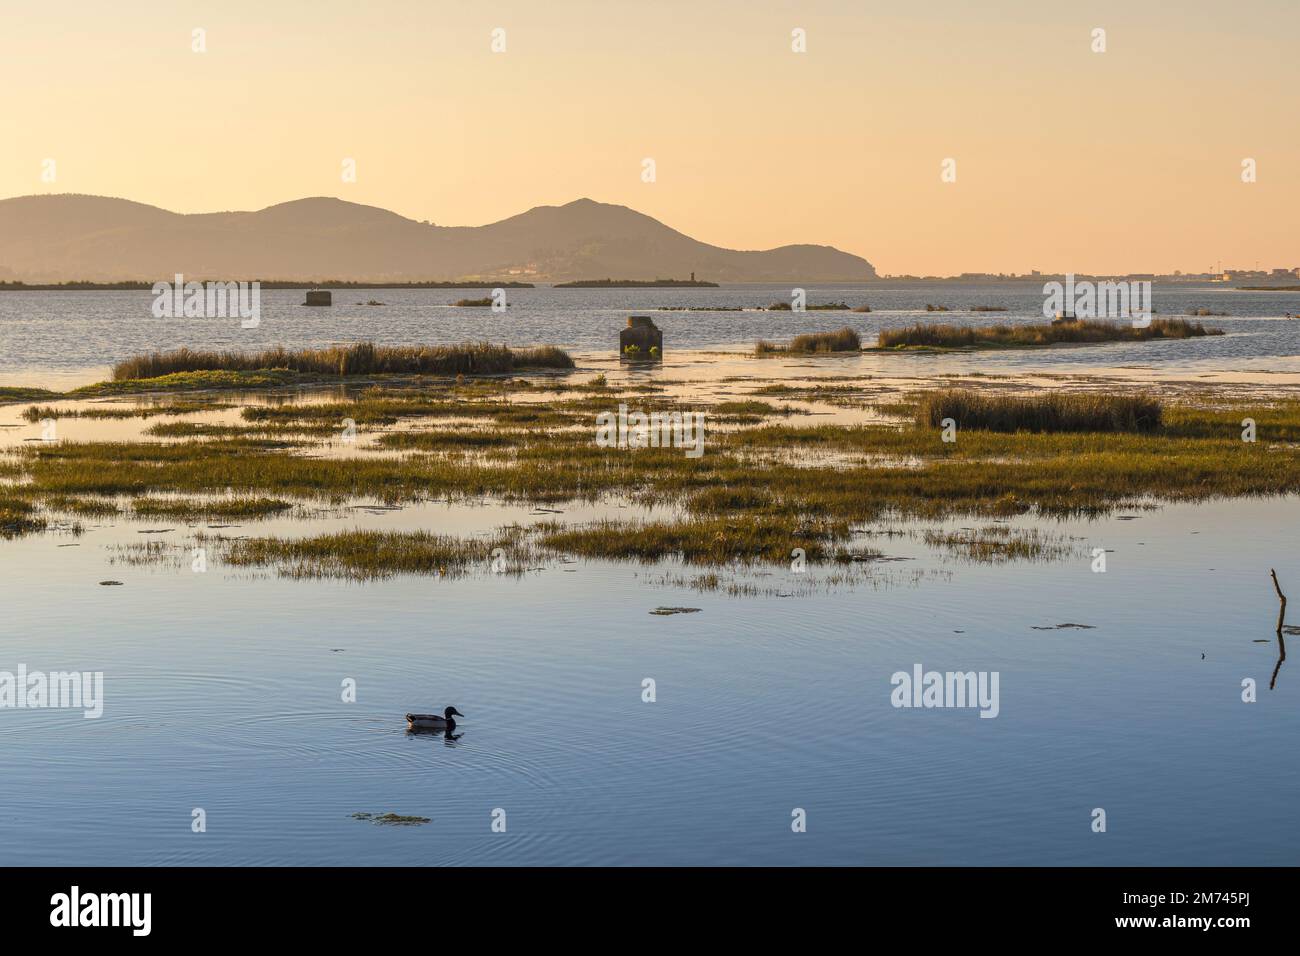 Swamp of the Asón river estuary with a duck and the town of Treto in the background in Colindres, Cantabria, Spain, Europe Stock Photo